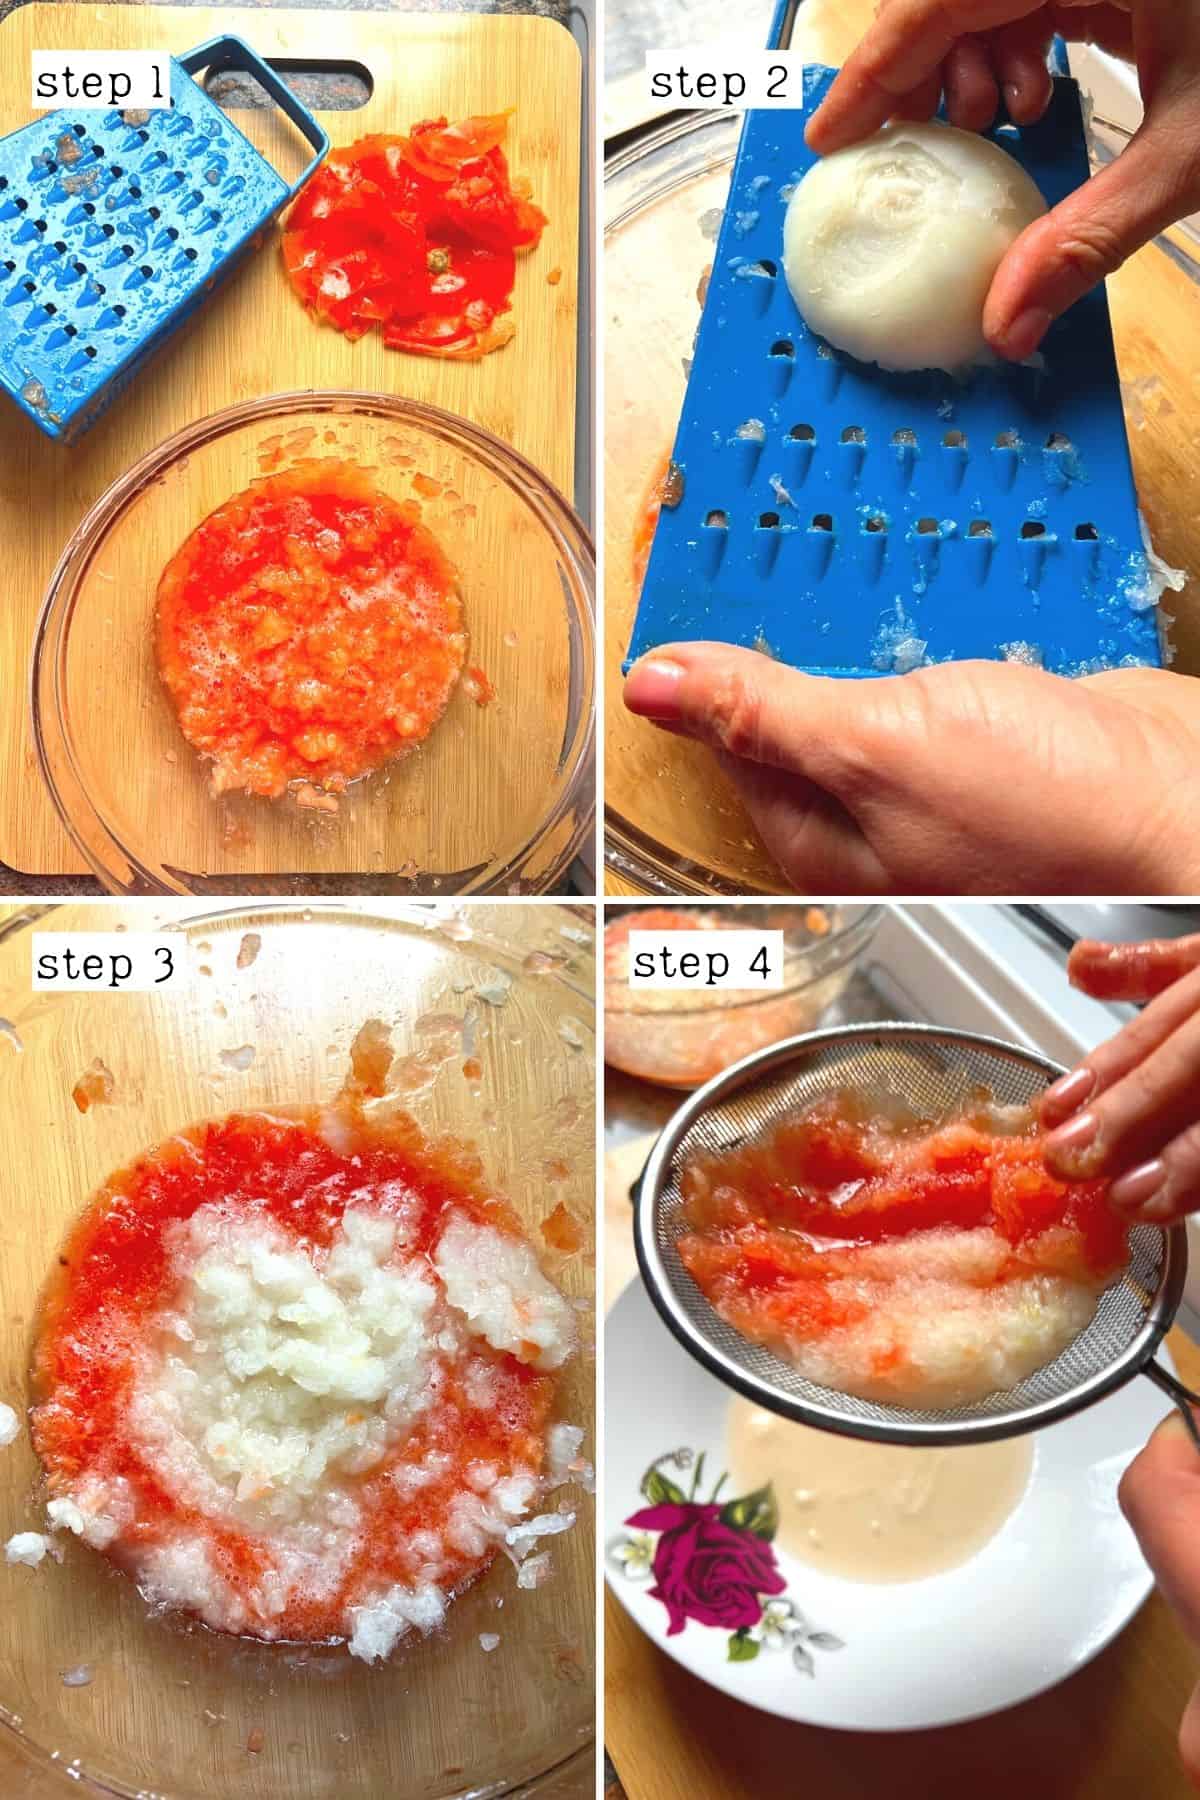 Steps for grating tomatoes and onions